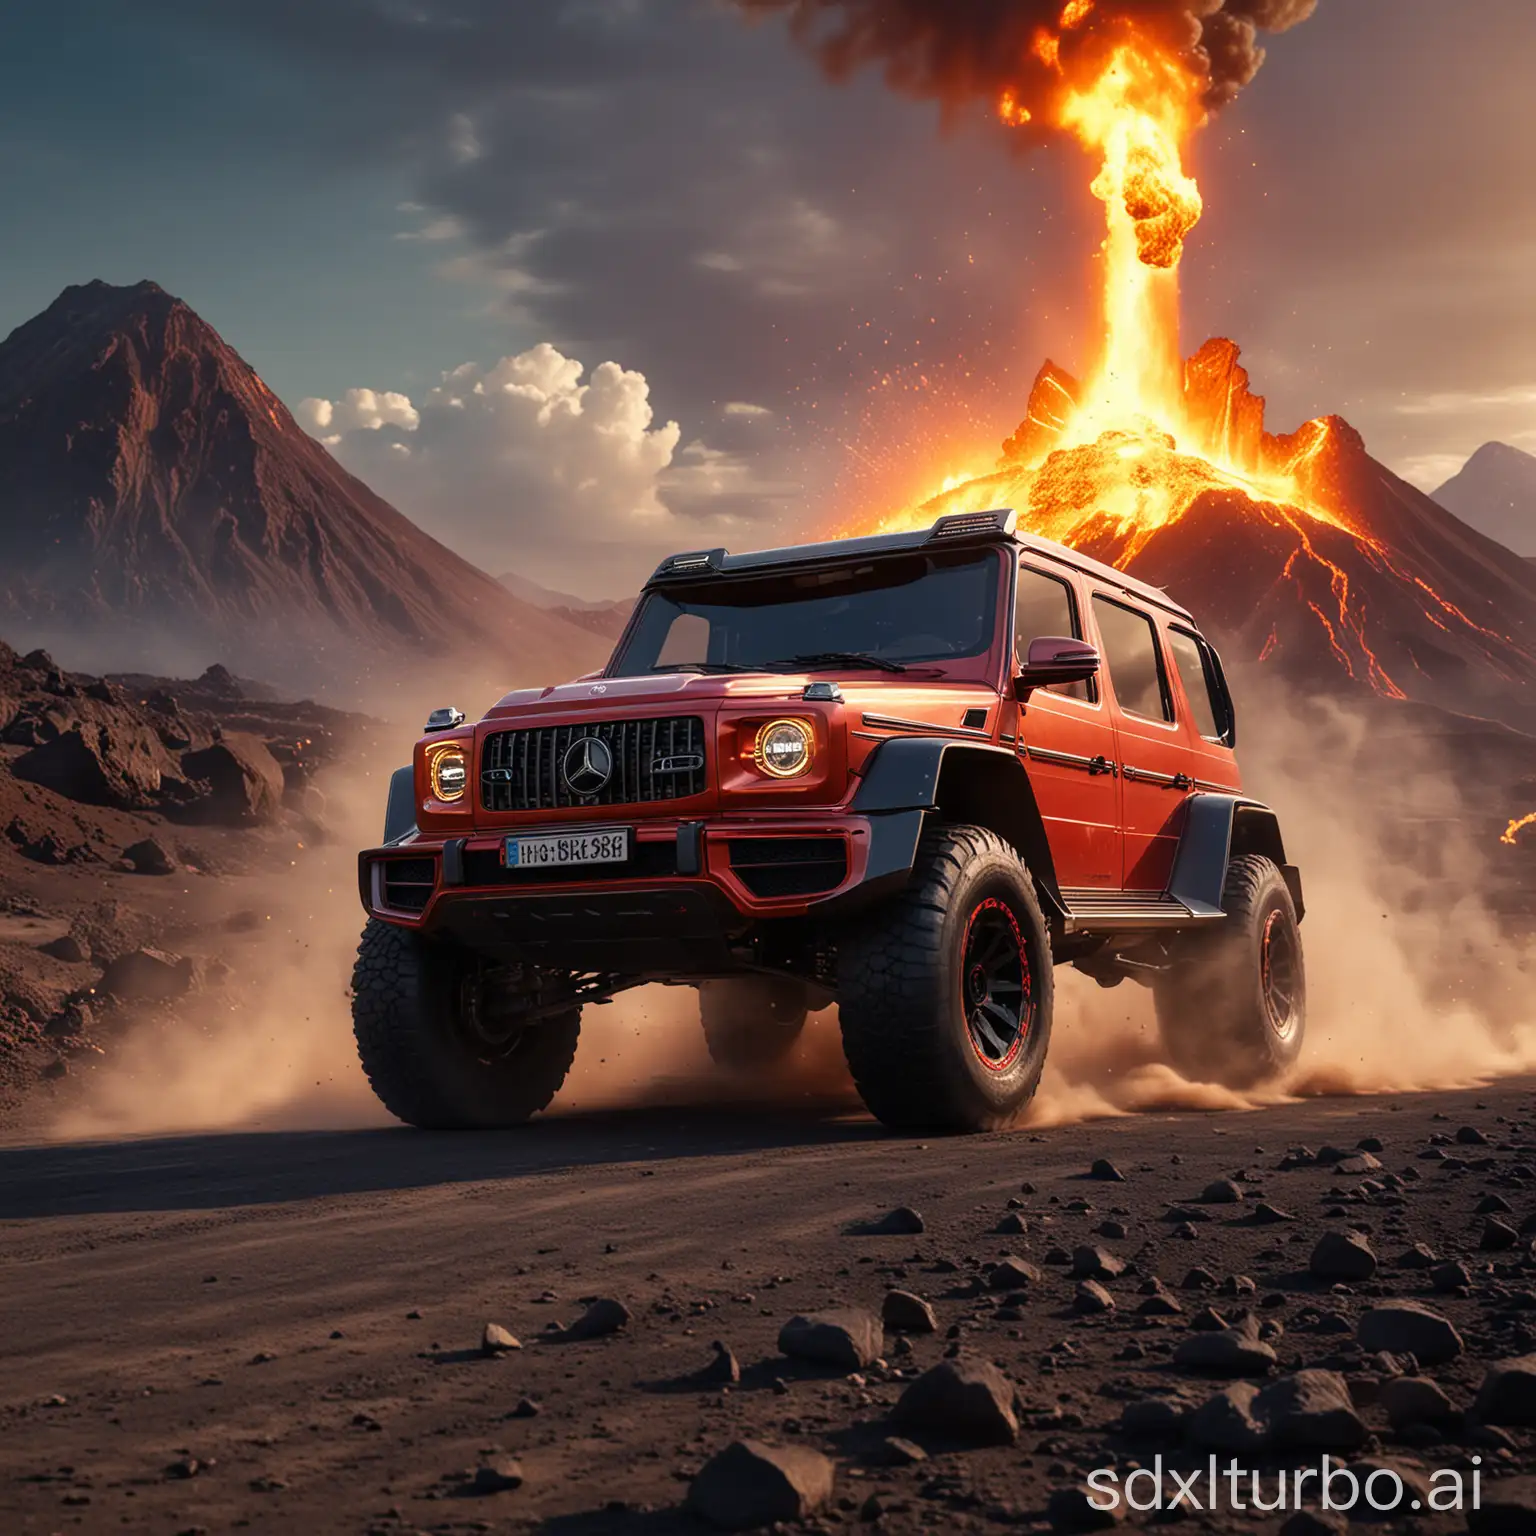 The huge fire unicorn rushes out of the volcano, chasing the future Mercedes-Benz G. The future Mercedes-Benz G is speeding in front, low angle of view, sporty atmosphere rendering, Hollywood science fiction style